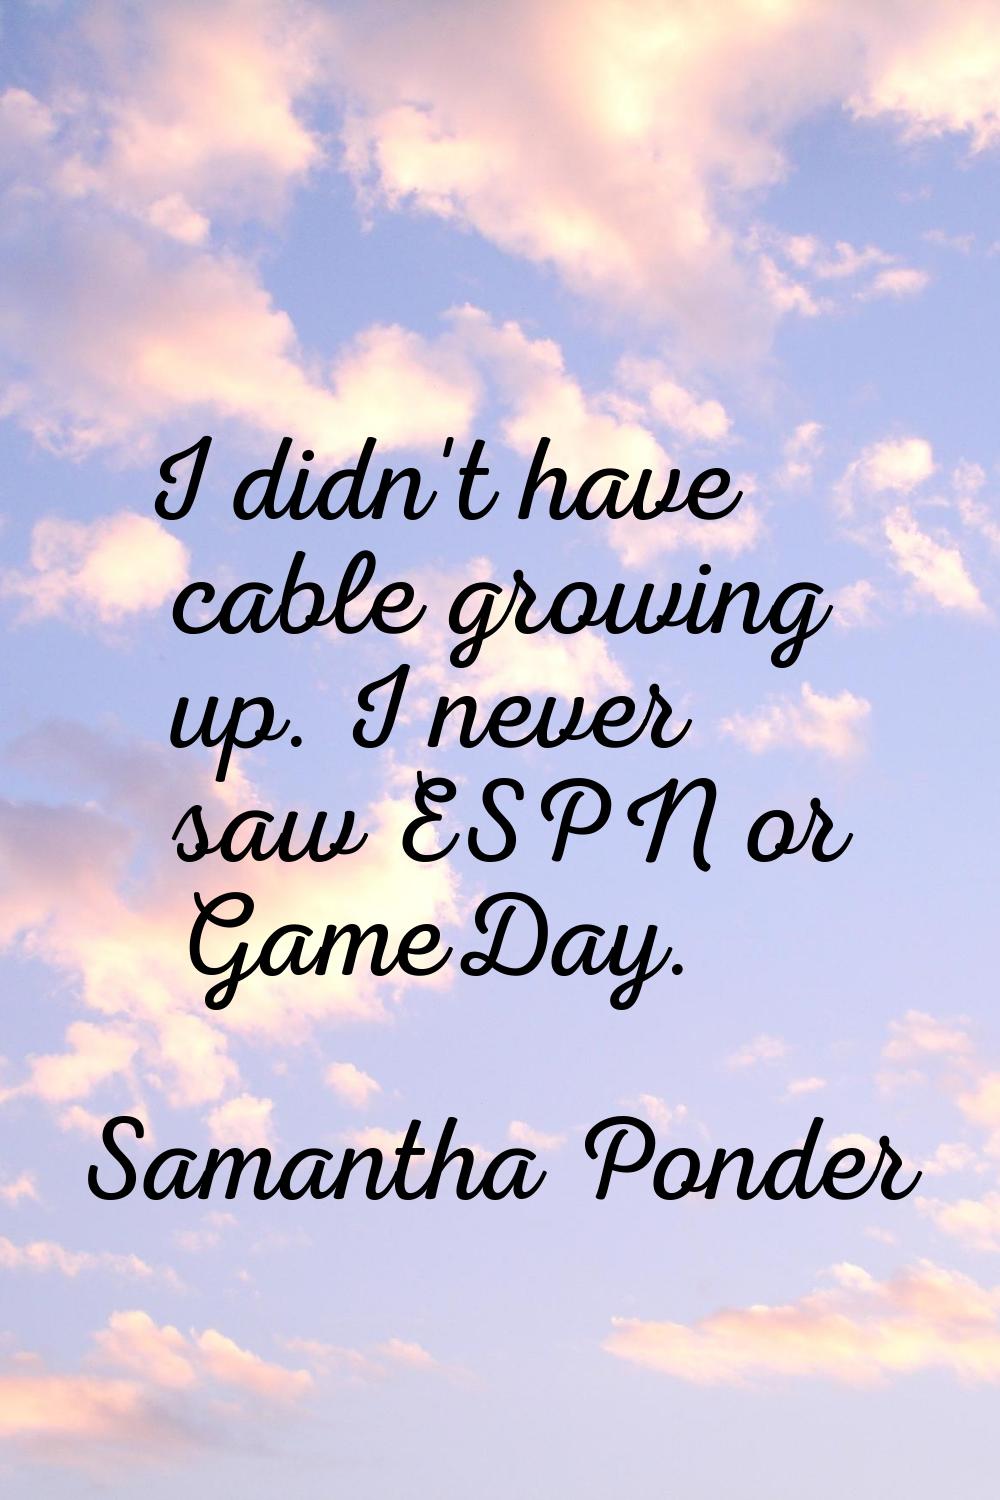 I didn't have cable growing up. I never saw ESPN or GameDay.